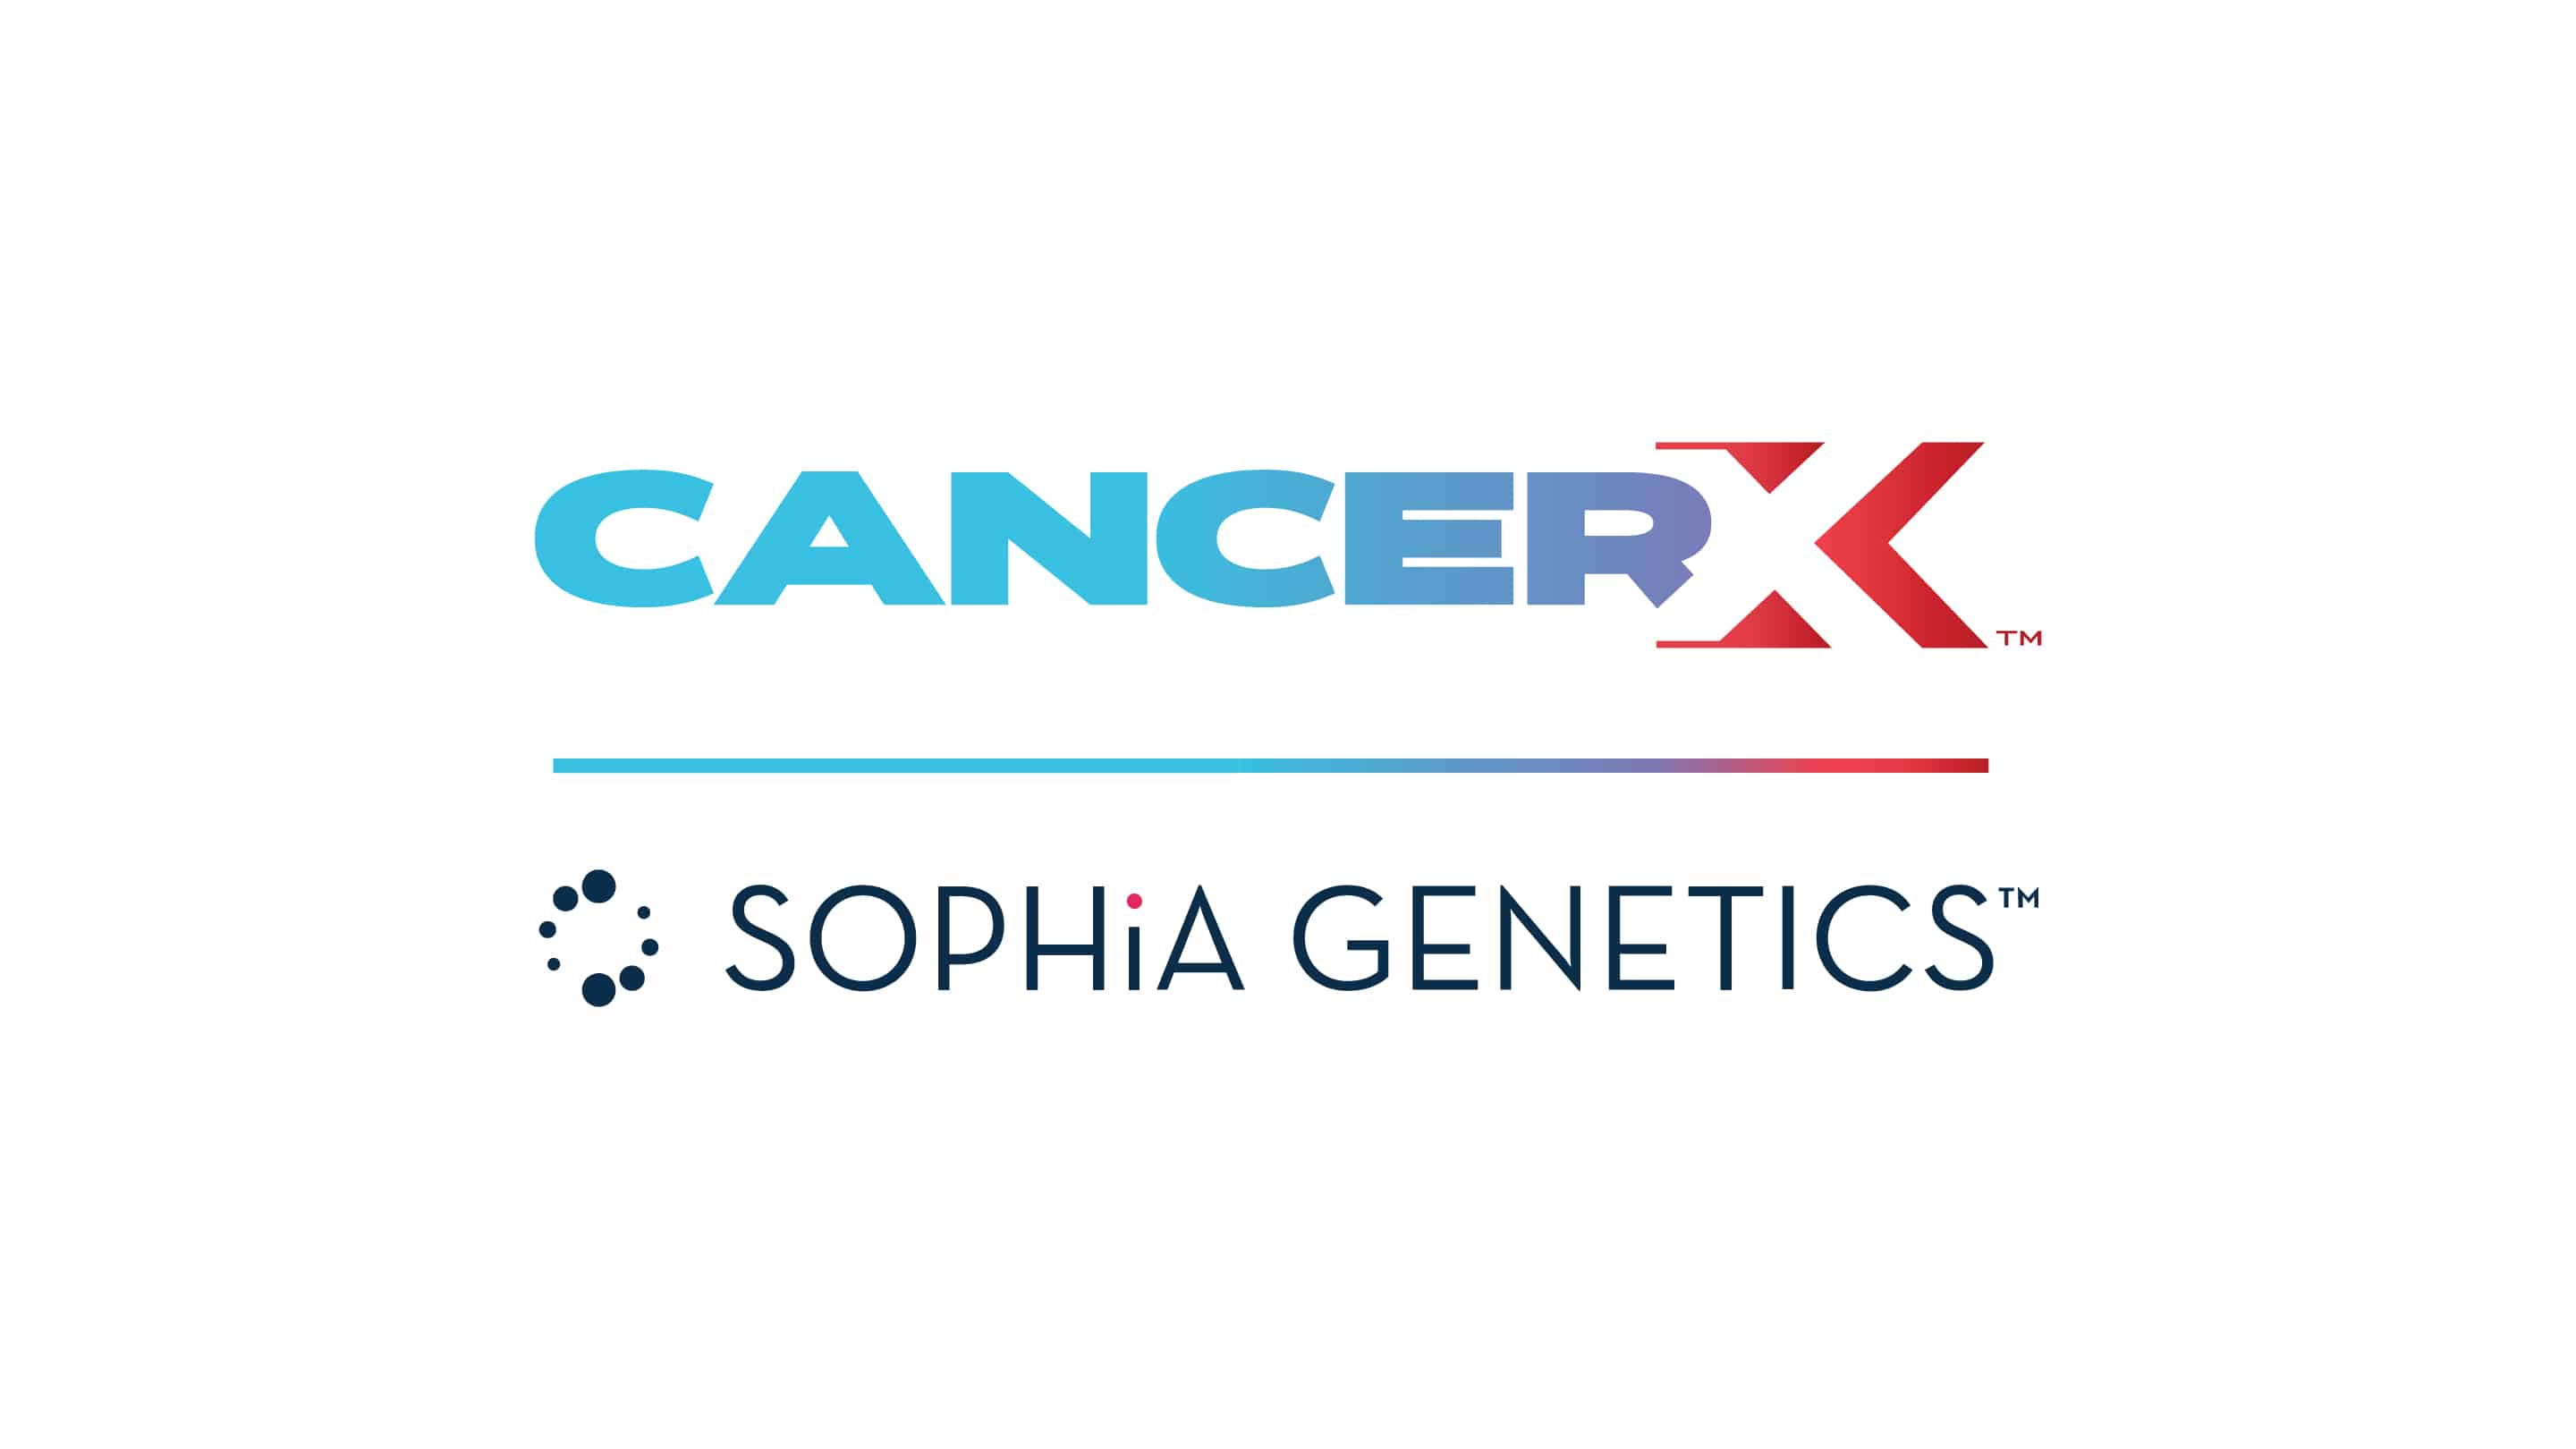 SOPHiA GENETICS Joins CancerX to Help Accelerate Cancer Research